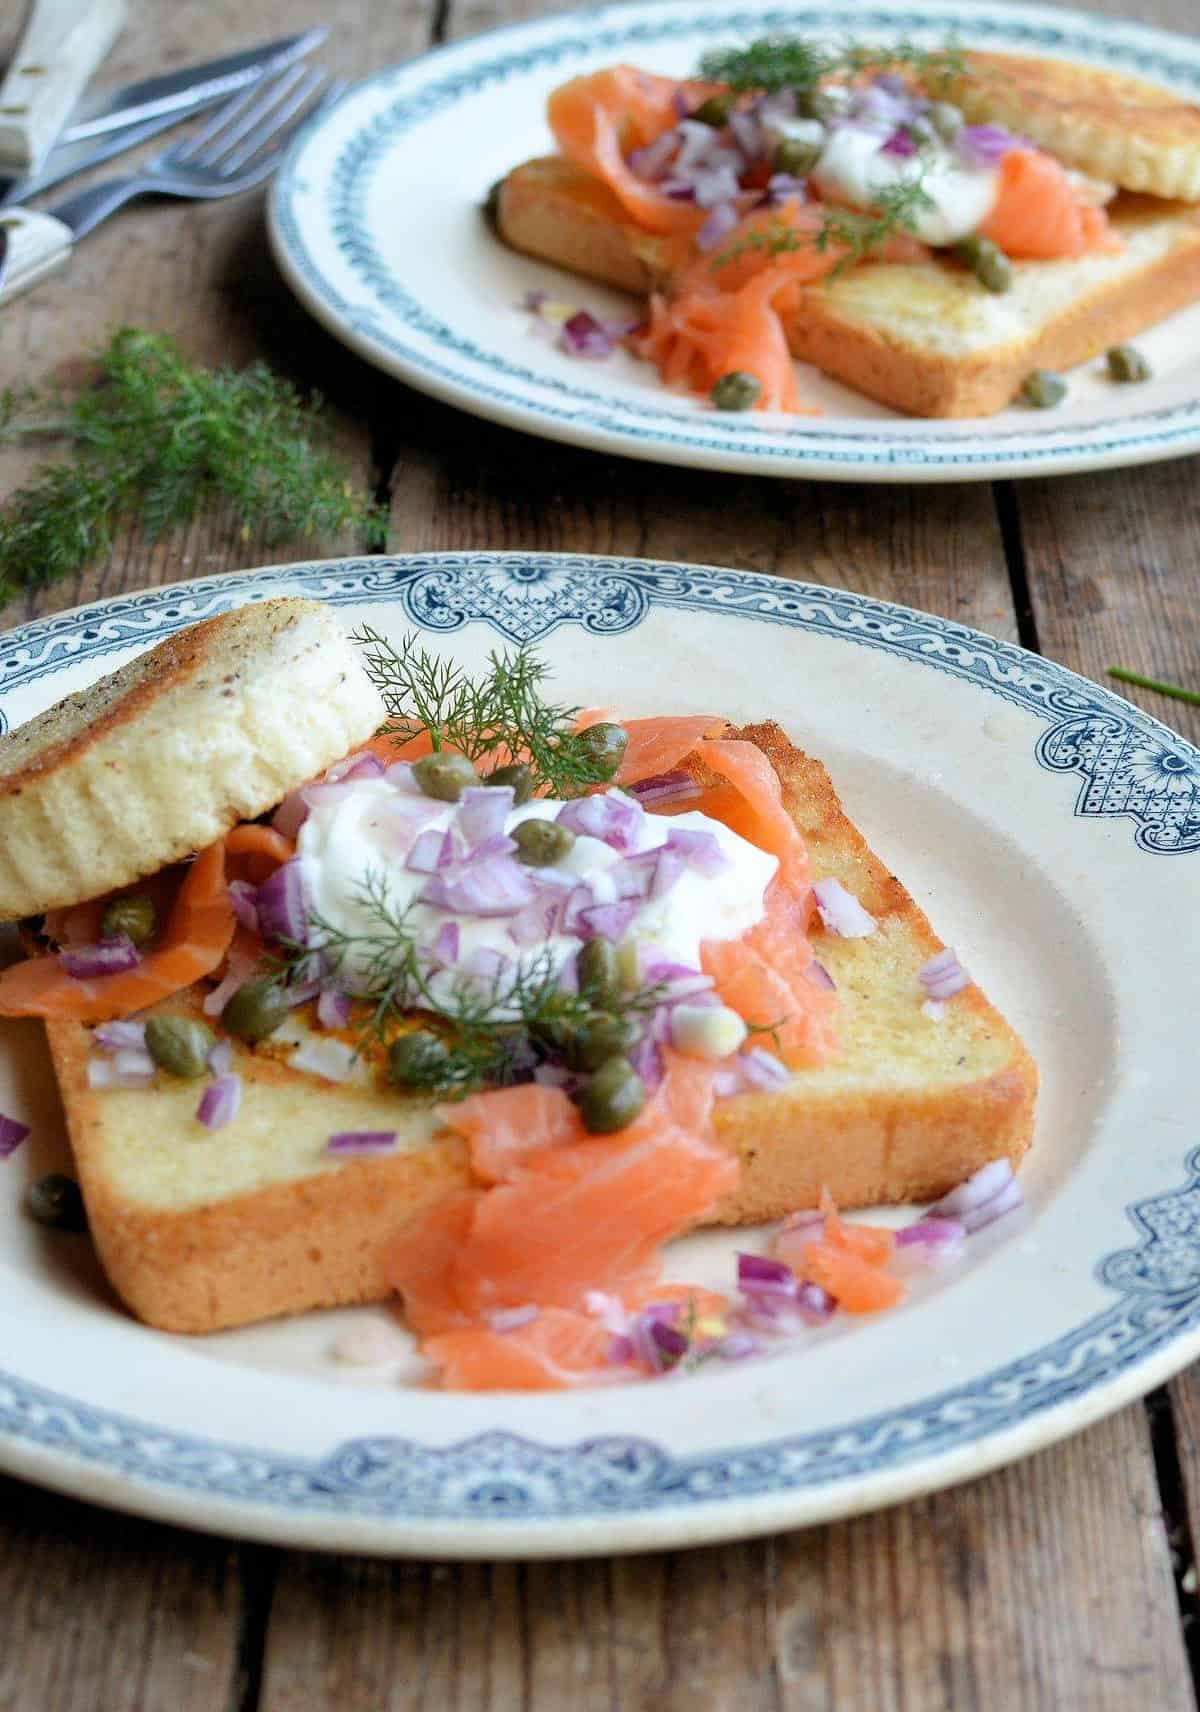  A match made in brunch heaven: perfectly cooked egg nestled in crispy bread and topped with delectable smoked salmon.